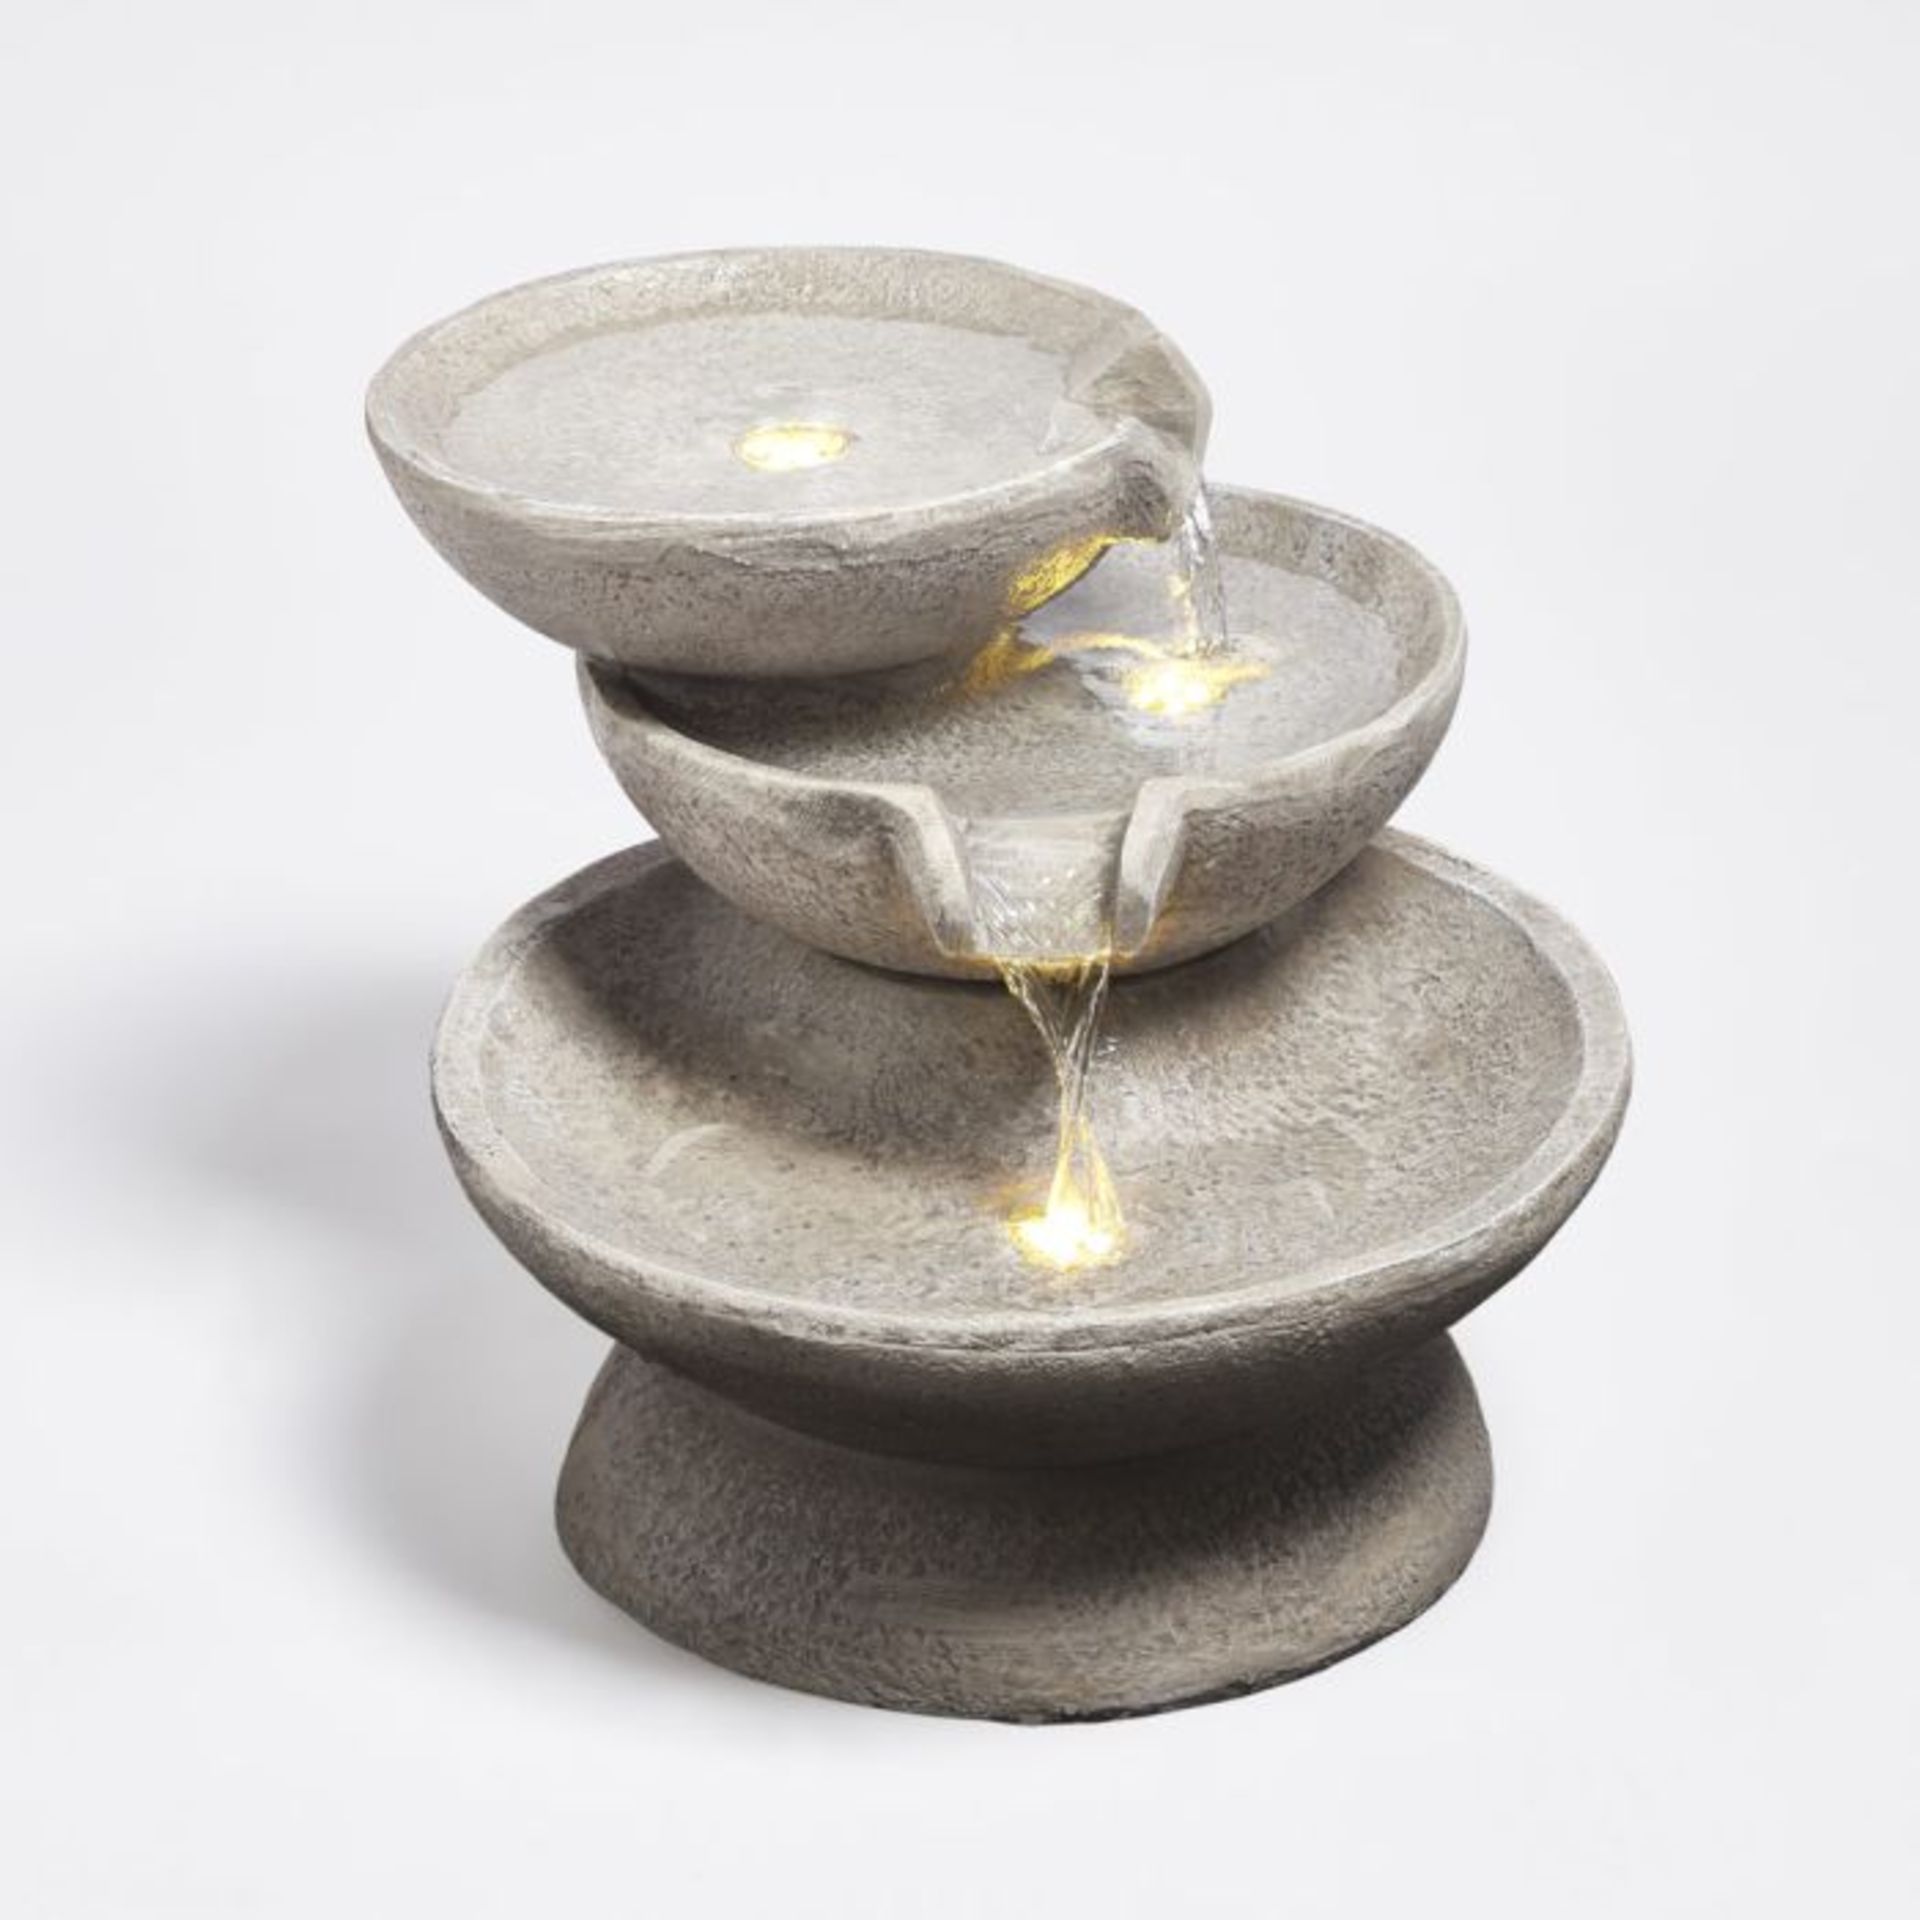 3 Bowl Drop Water Feature. - ER43. The perfect meditative accessory to add a feeling of calm to your